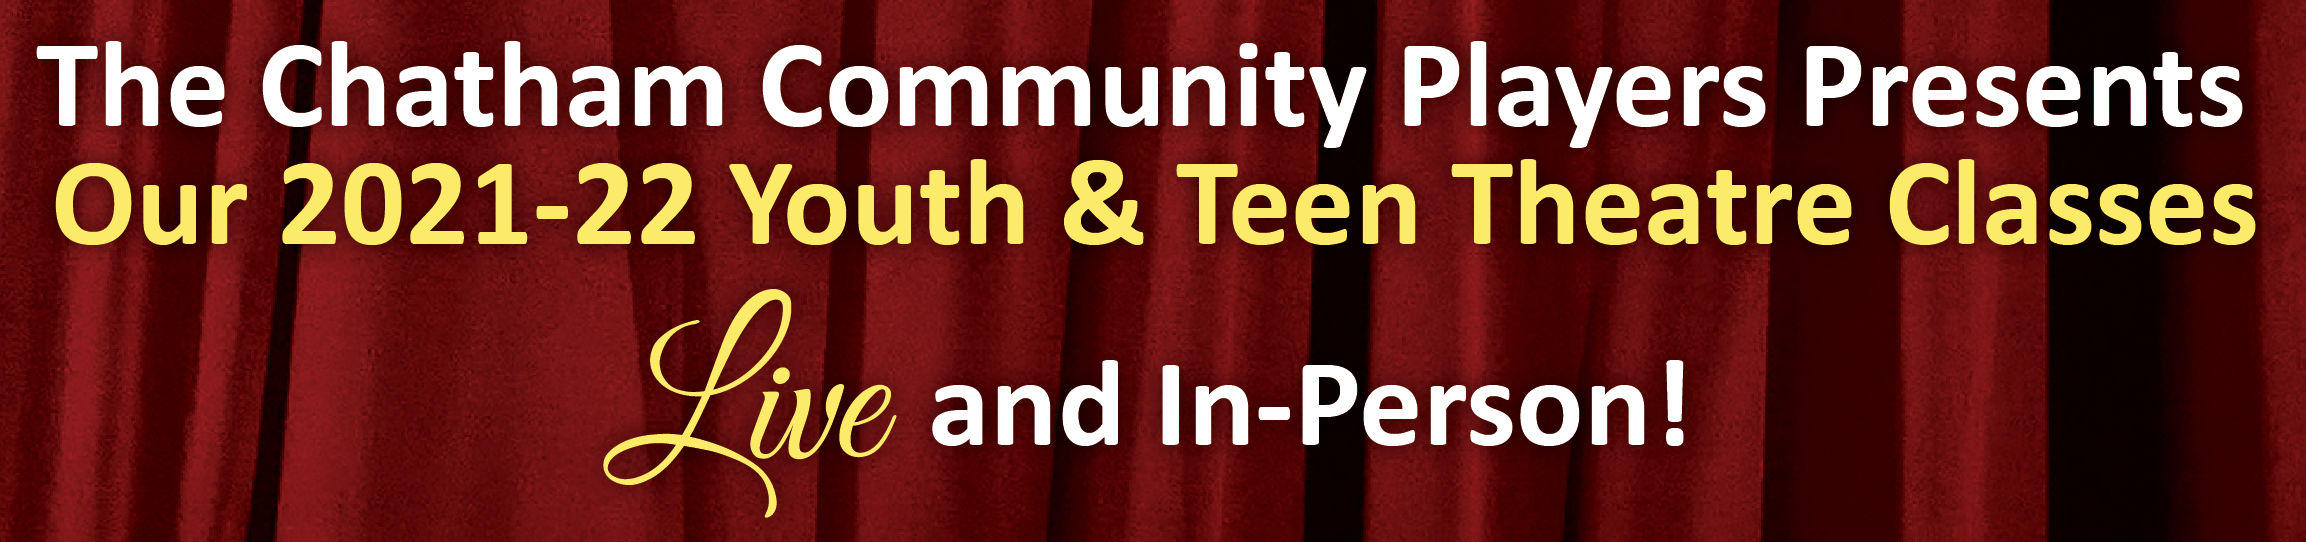 In person youth and teen theatre classes